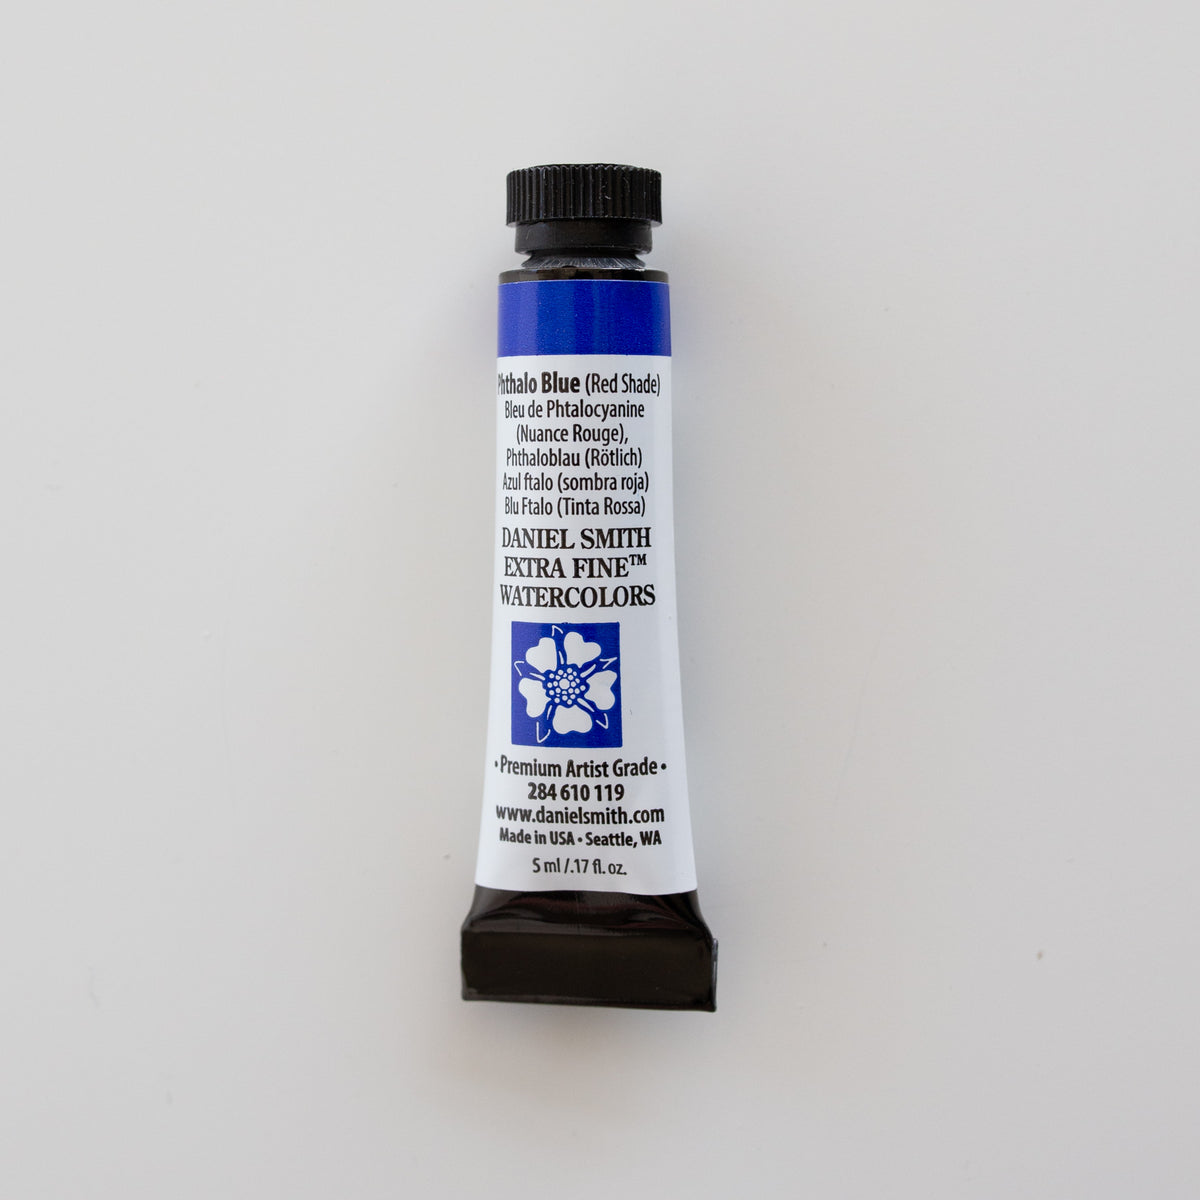 Daniel Smith Watercolor 5ml extra fine Phthalo Blue (Red Shade) 1